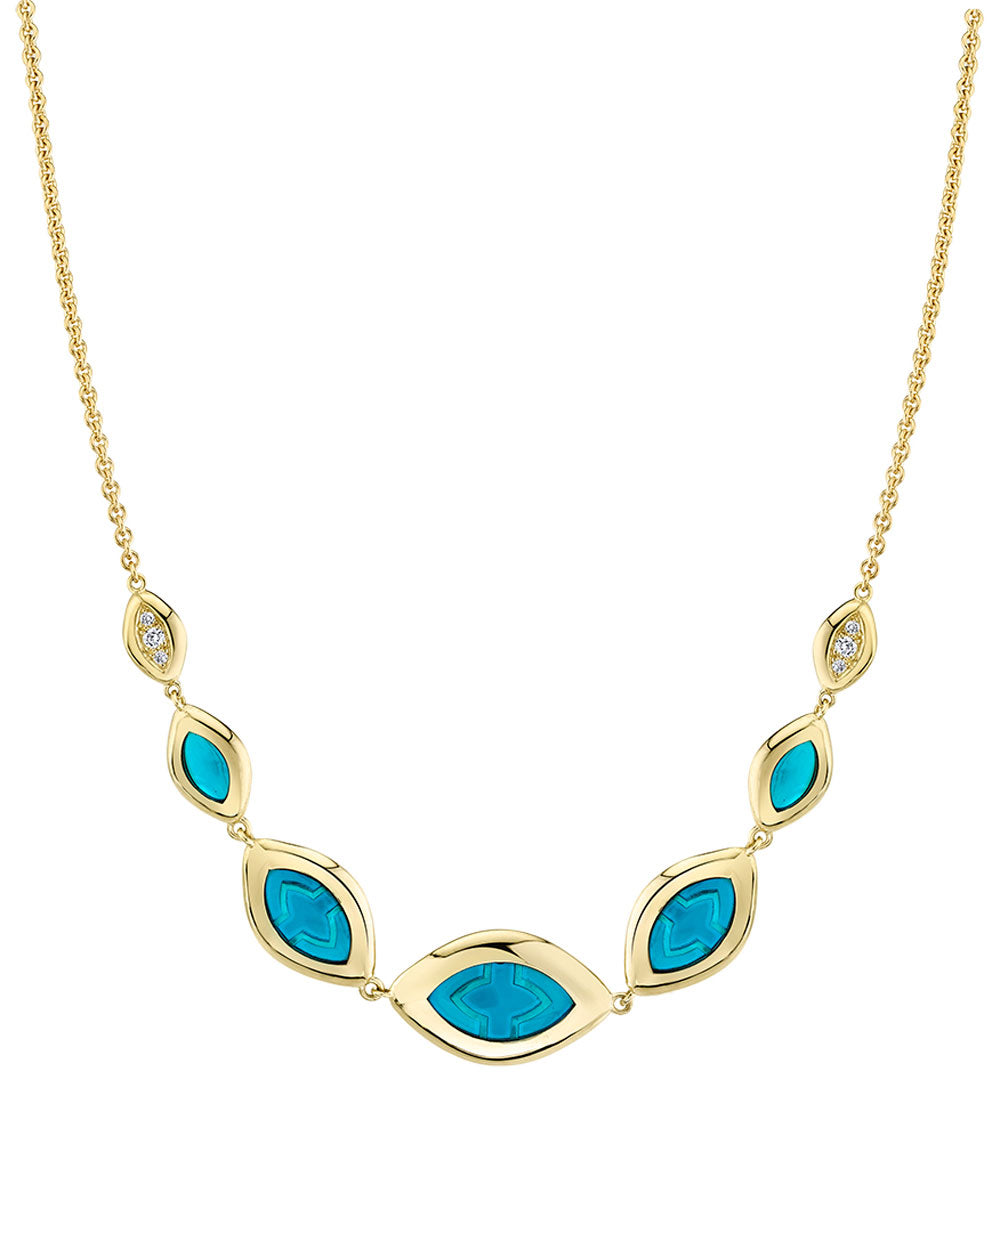 Blue Enamel and Cats Eye Graduated Link Necklace